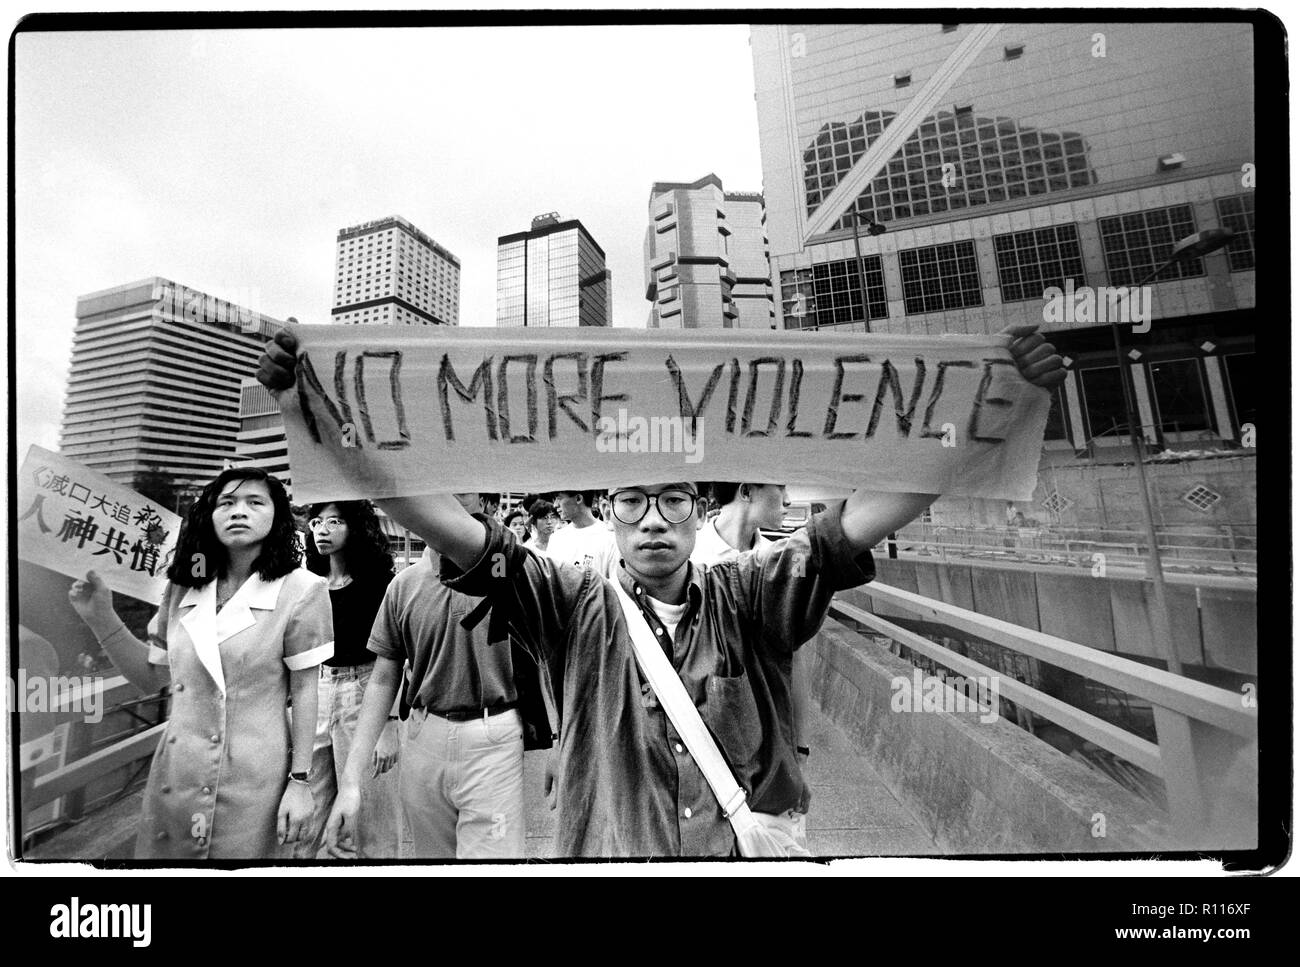 Hong Kong two days after the massacre in Tiananmen Square in Beijing in June 1989 Students protest the deaths of fellow students in Beijing days earlier near the British Embassy in Hong Kong Stock Photo